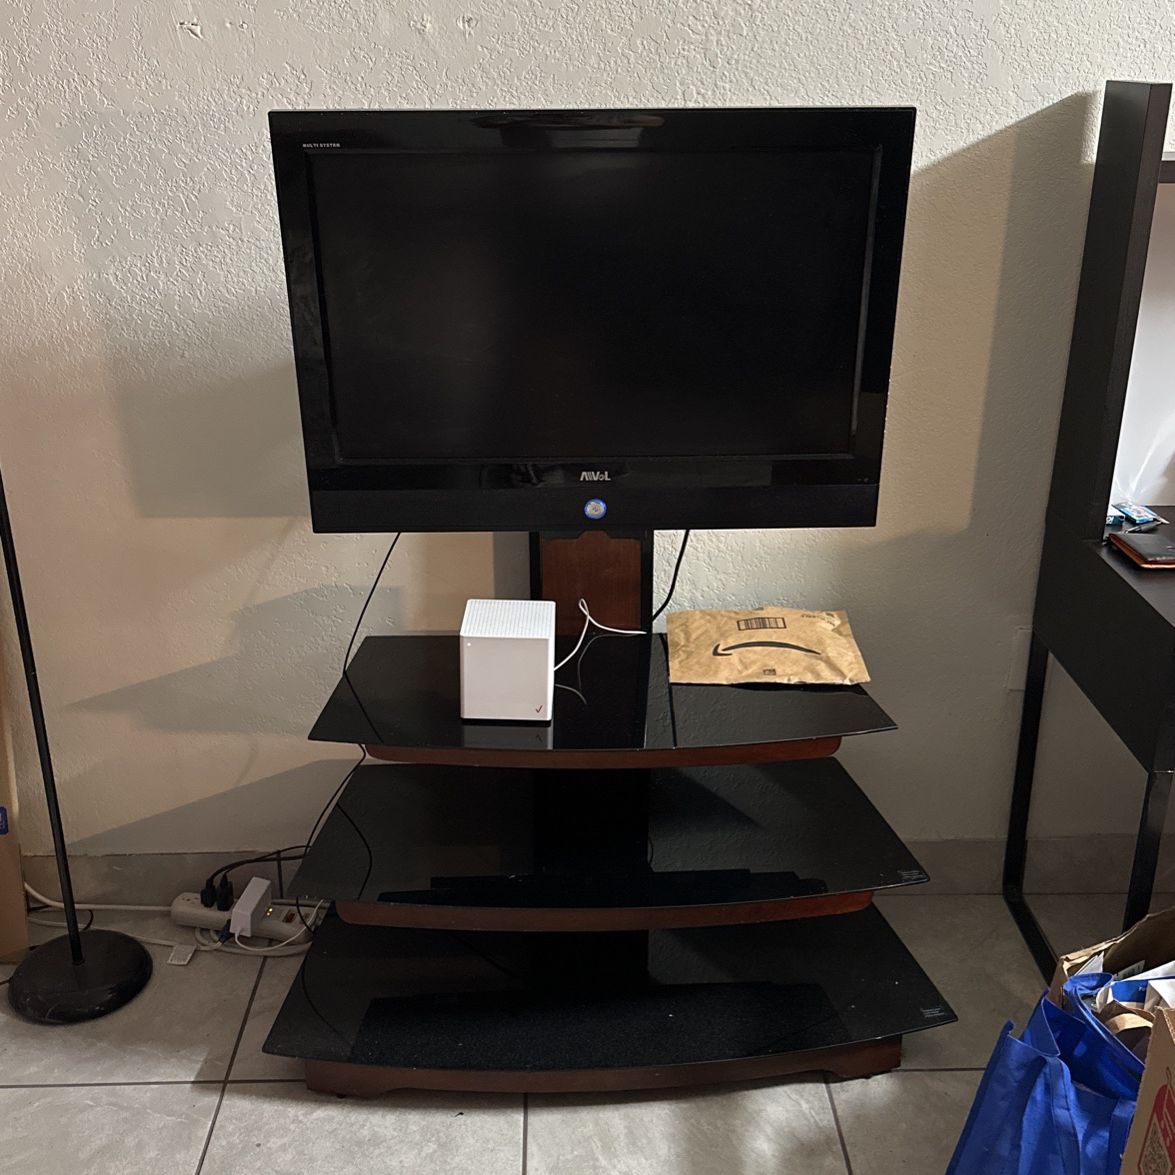 32” LCD TV With Stand Included